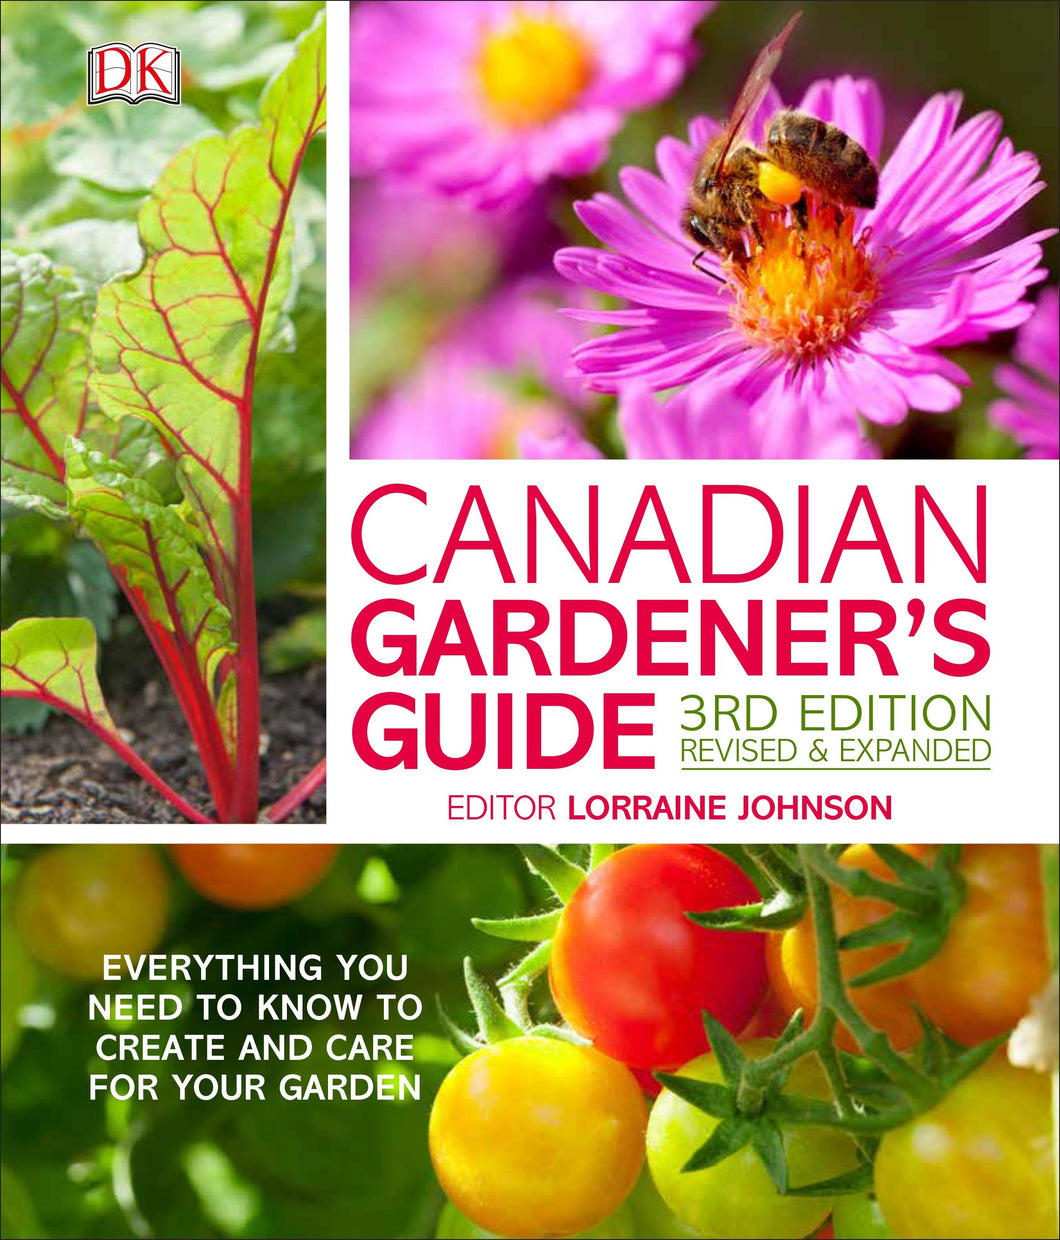 Canadian Gardener's Guide 3rd Edition